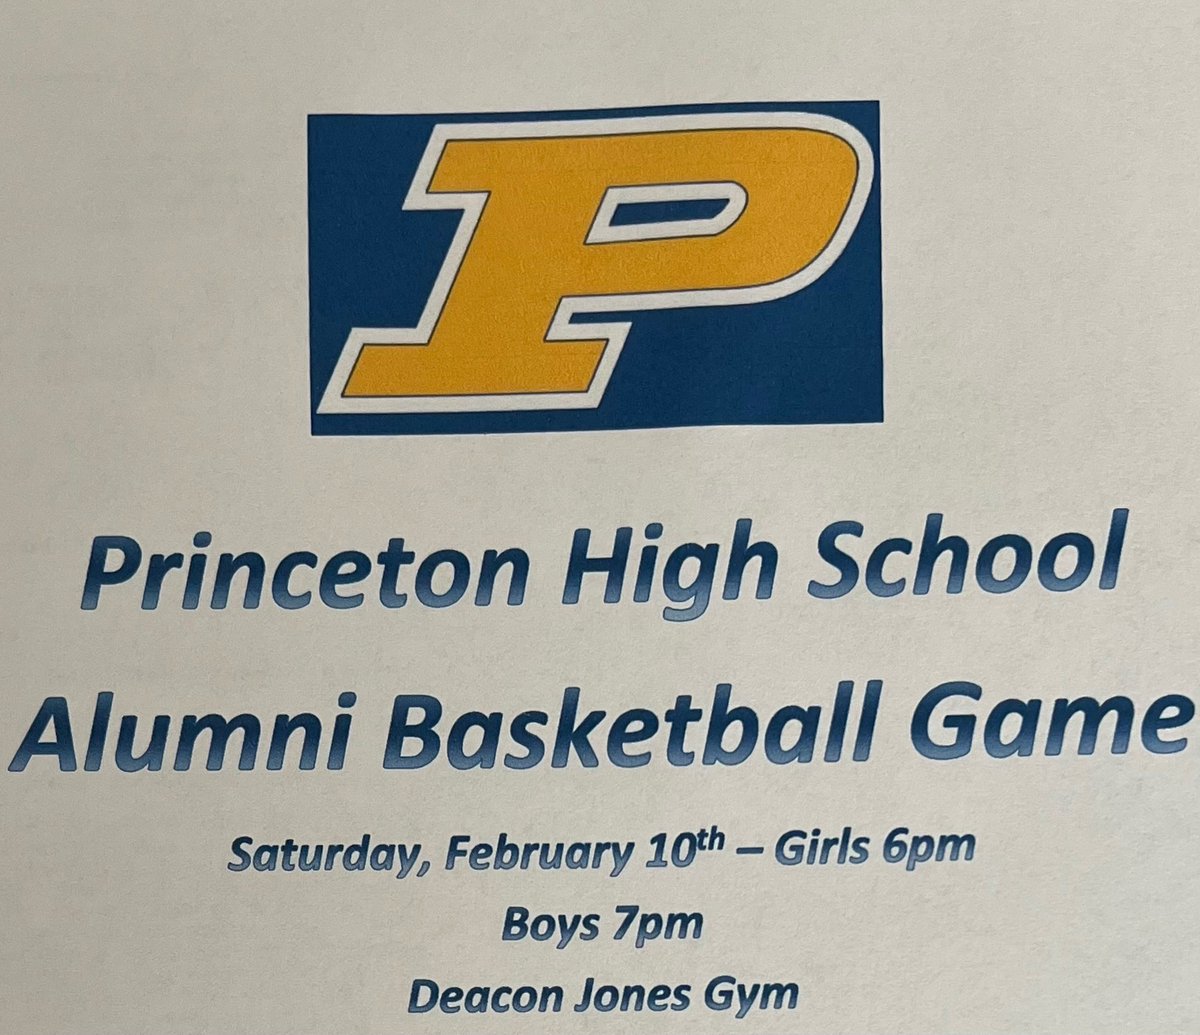 Alumni Game is Only a 1 Day Away!!! Make plans to attend Saturday (Feb. 10th). There will be a $5 gate fee. The Booster Club will also be selling 50/50 Raffle tickets for the Feb. 16th drawing. Come ready to have a great time. See you Saturday!!